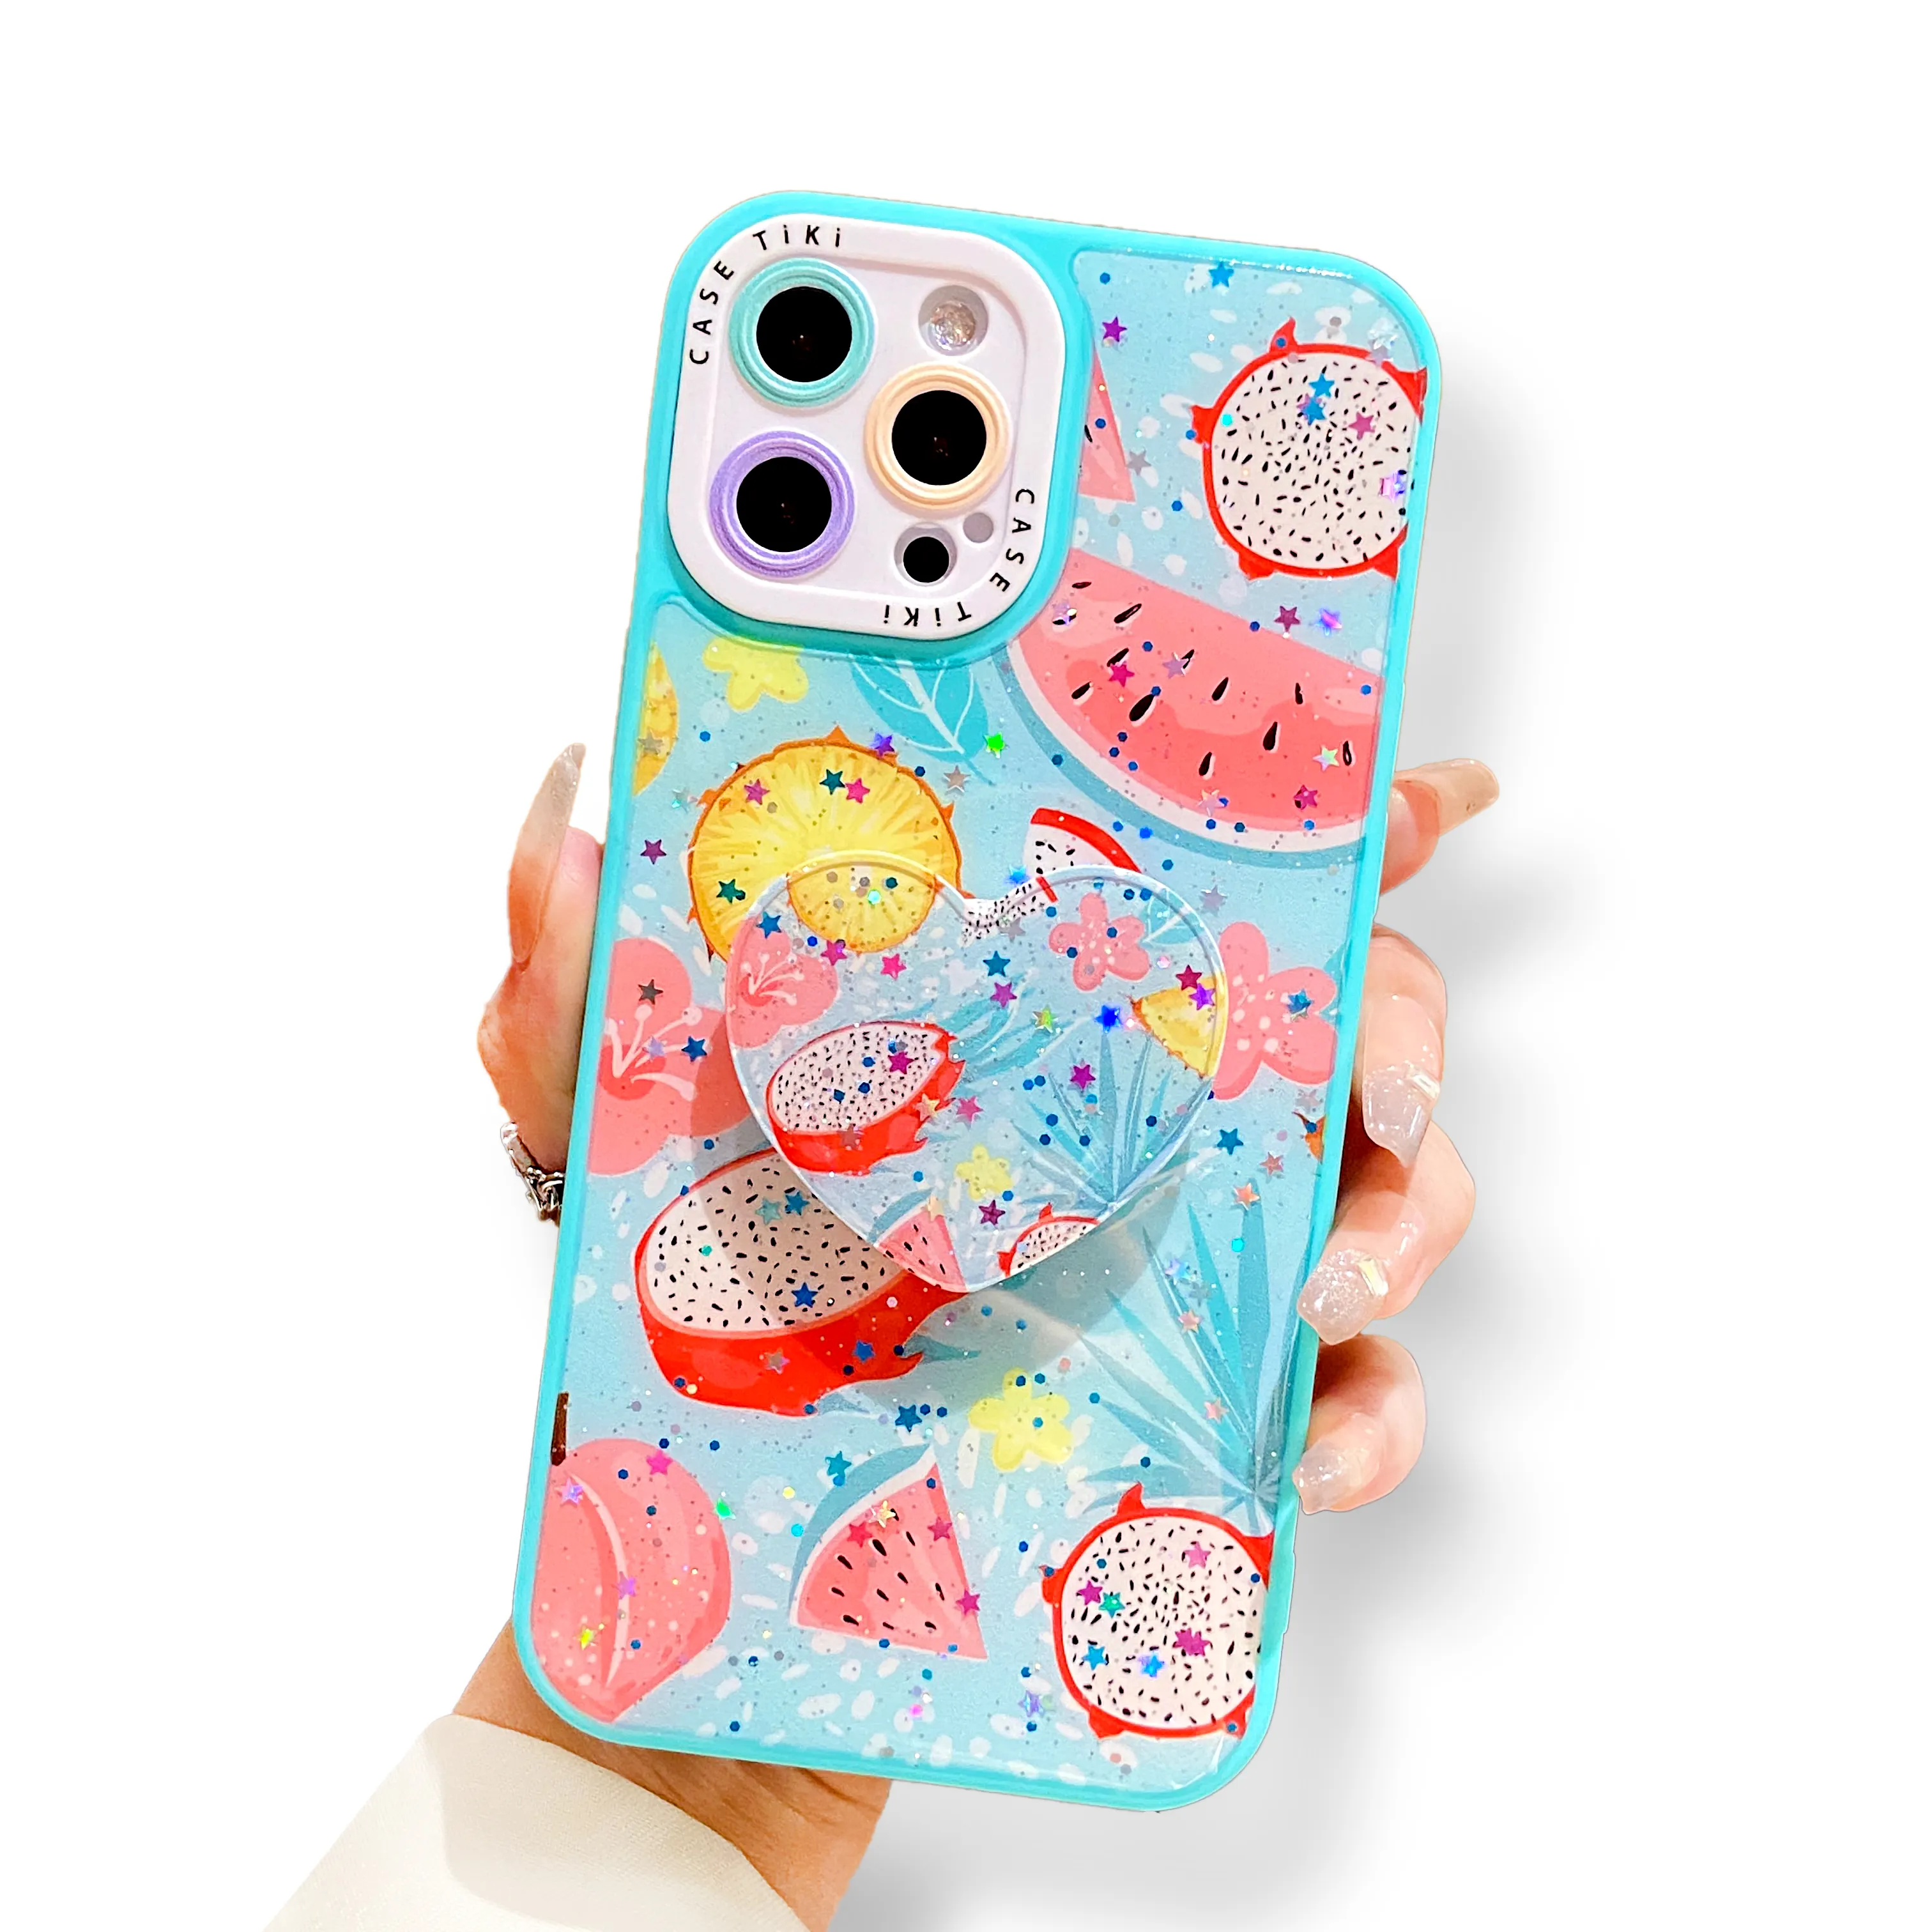 Fashion Abstract Art Painted Phone Case For Xiaomi Redmi Note 8t Multicolor Soft TPU Cover Pretty